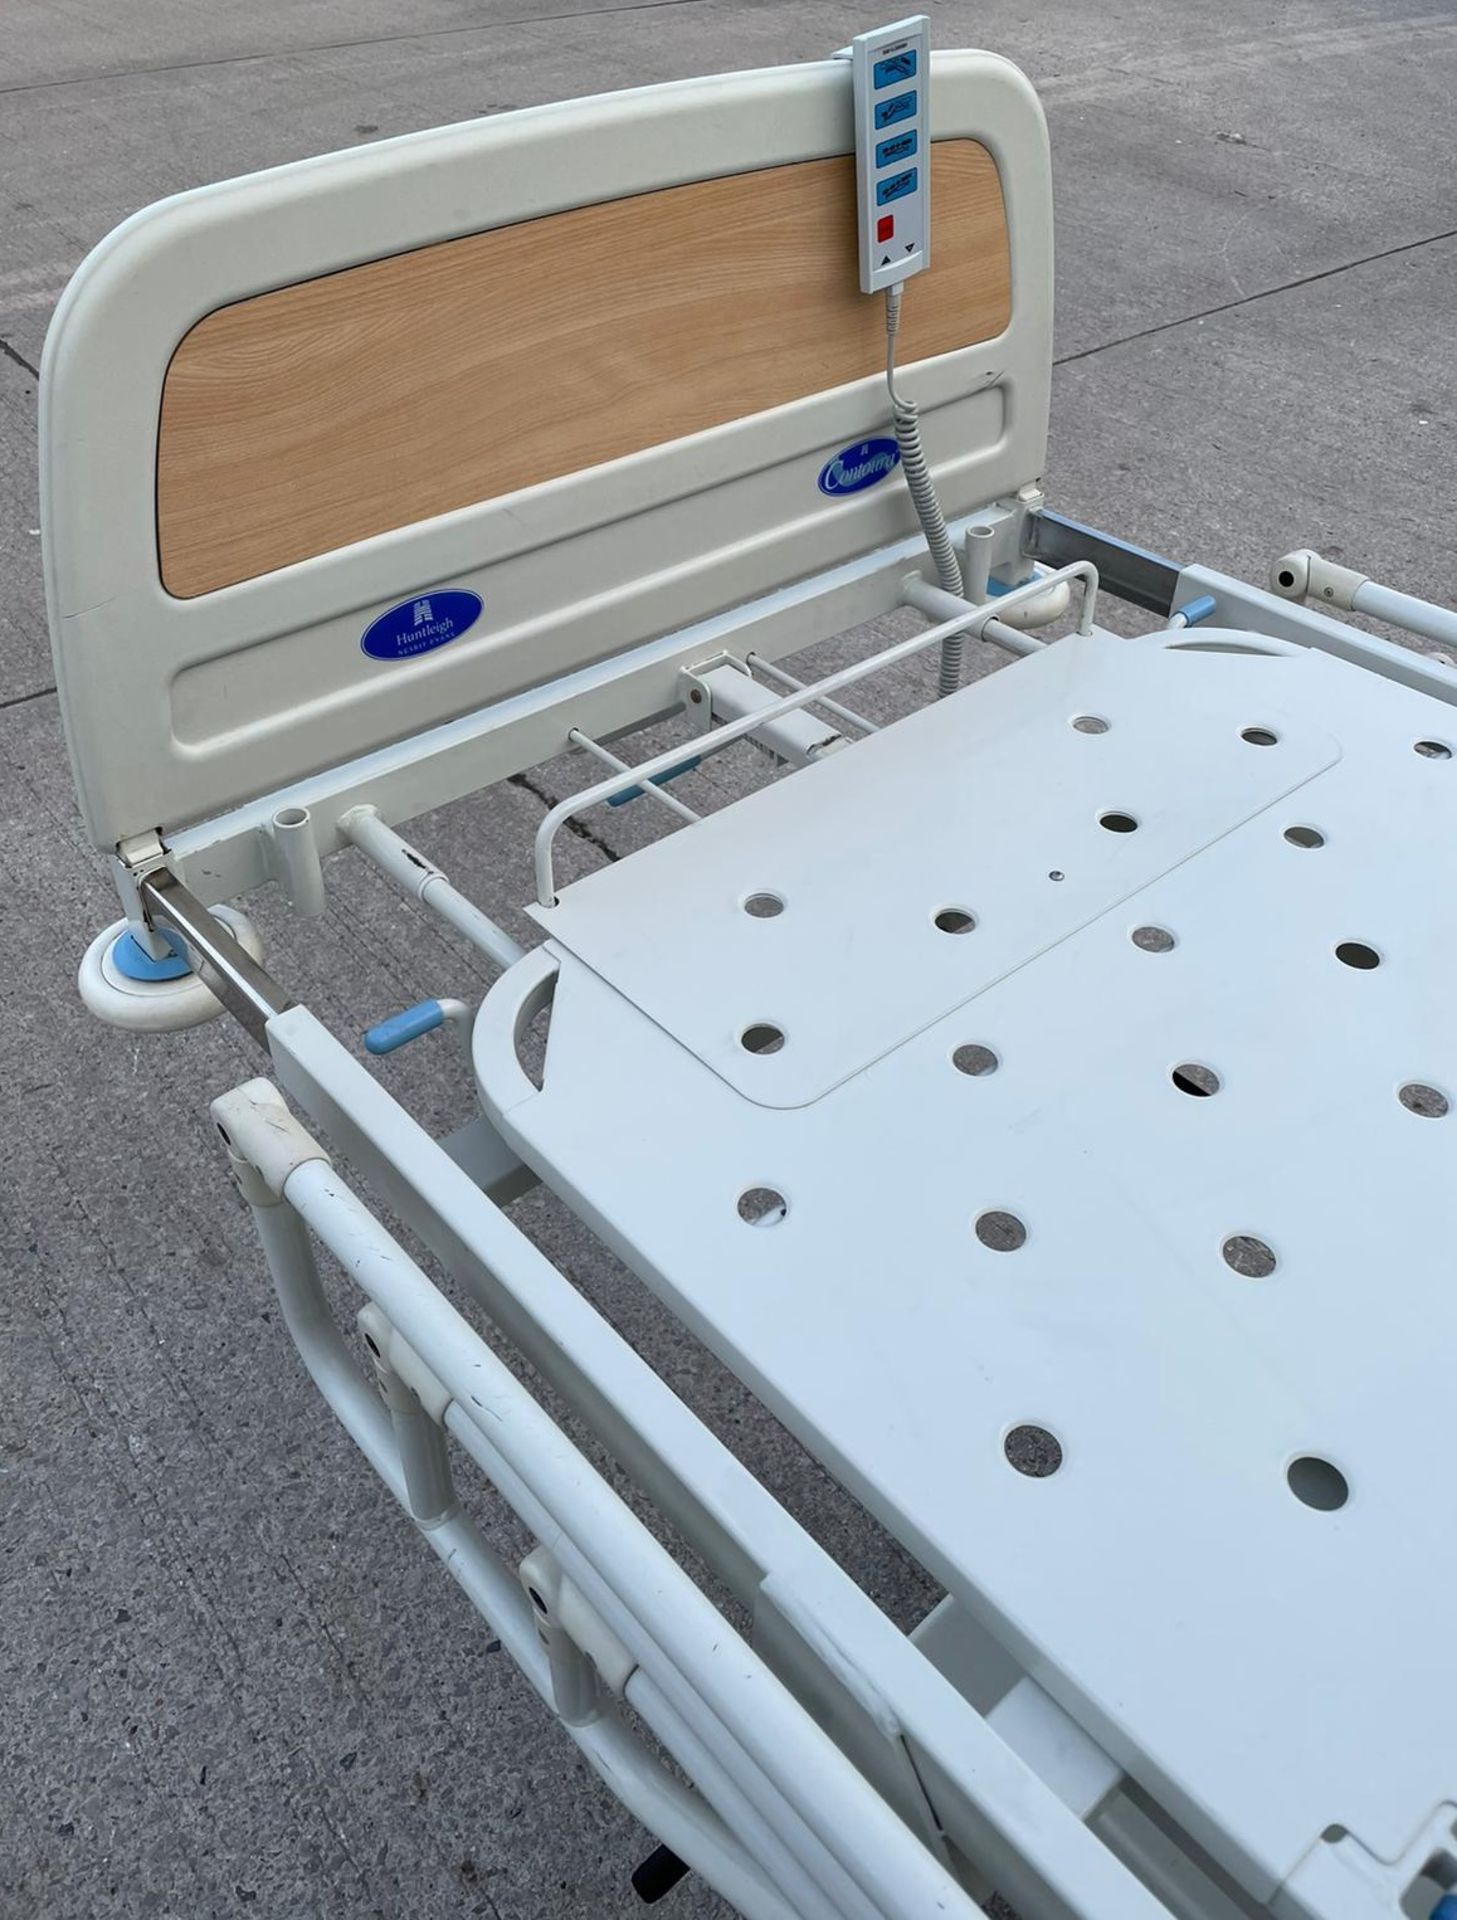 1 x Huntleigh CONTOURA Electric Hospital Bed - Features Rise/Fall 3-Way Profiling, Side Rails, - Image 8 of 8